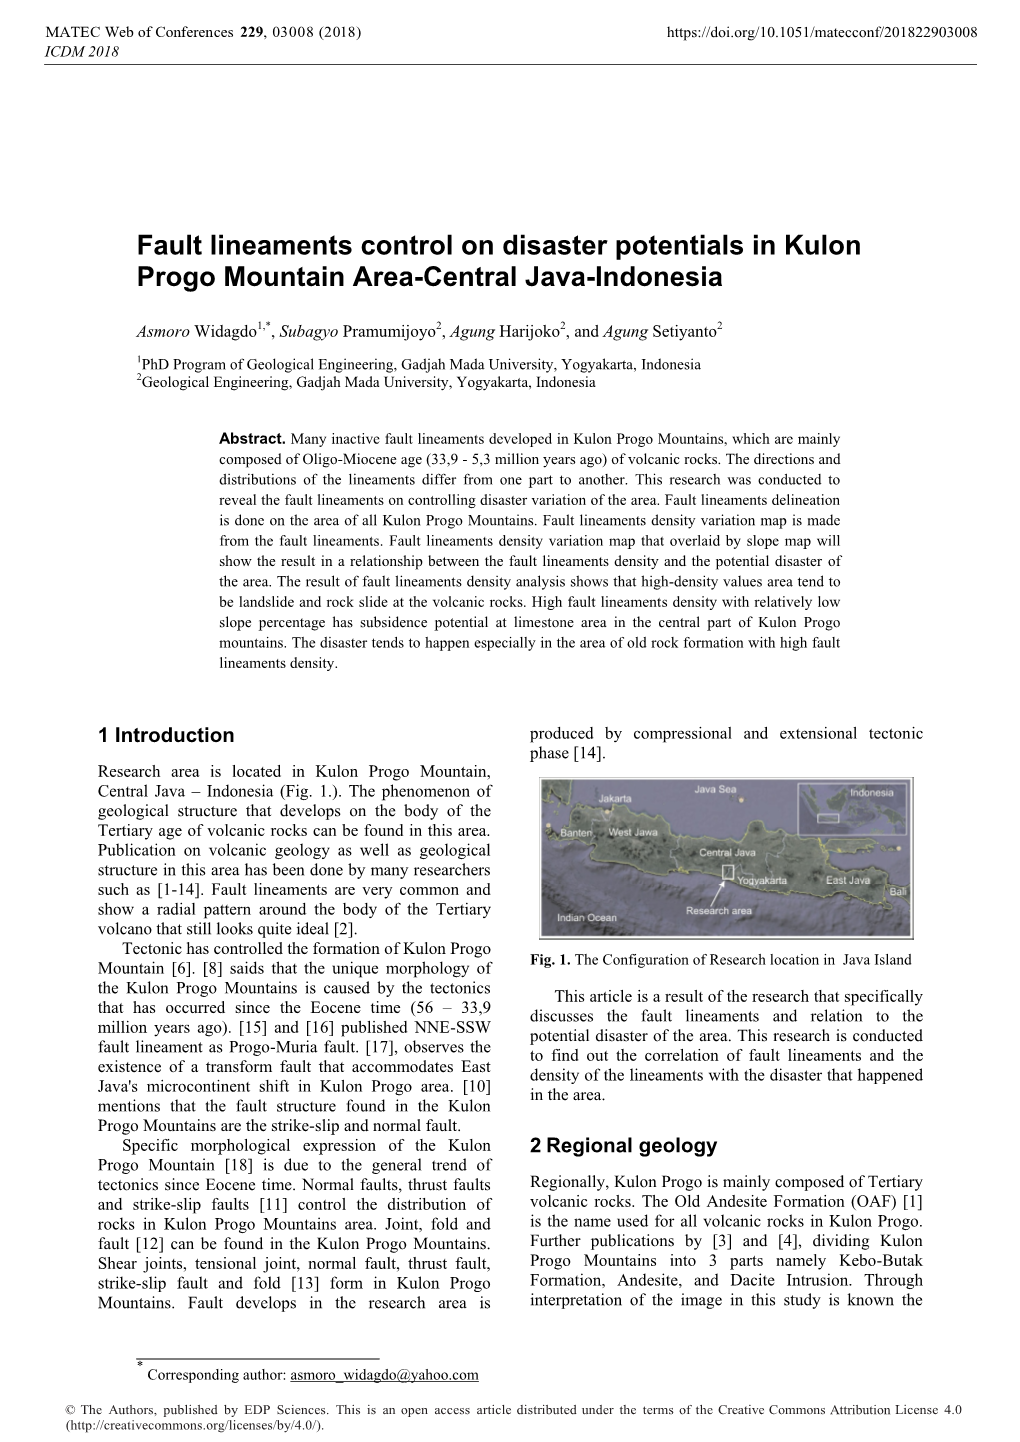 Fault Lineaments Control on Disaster Potentials in Kulon Progo Mountain Area-Central Java-Indonesia